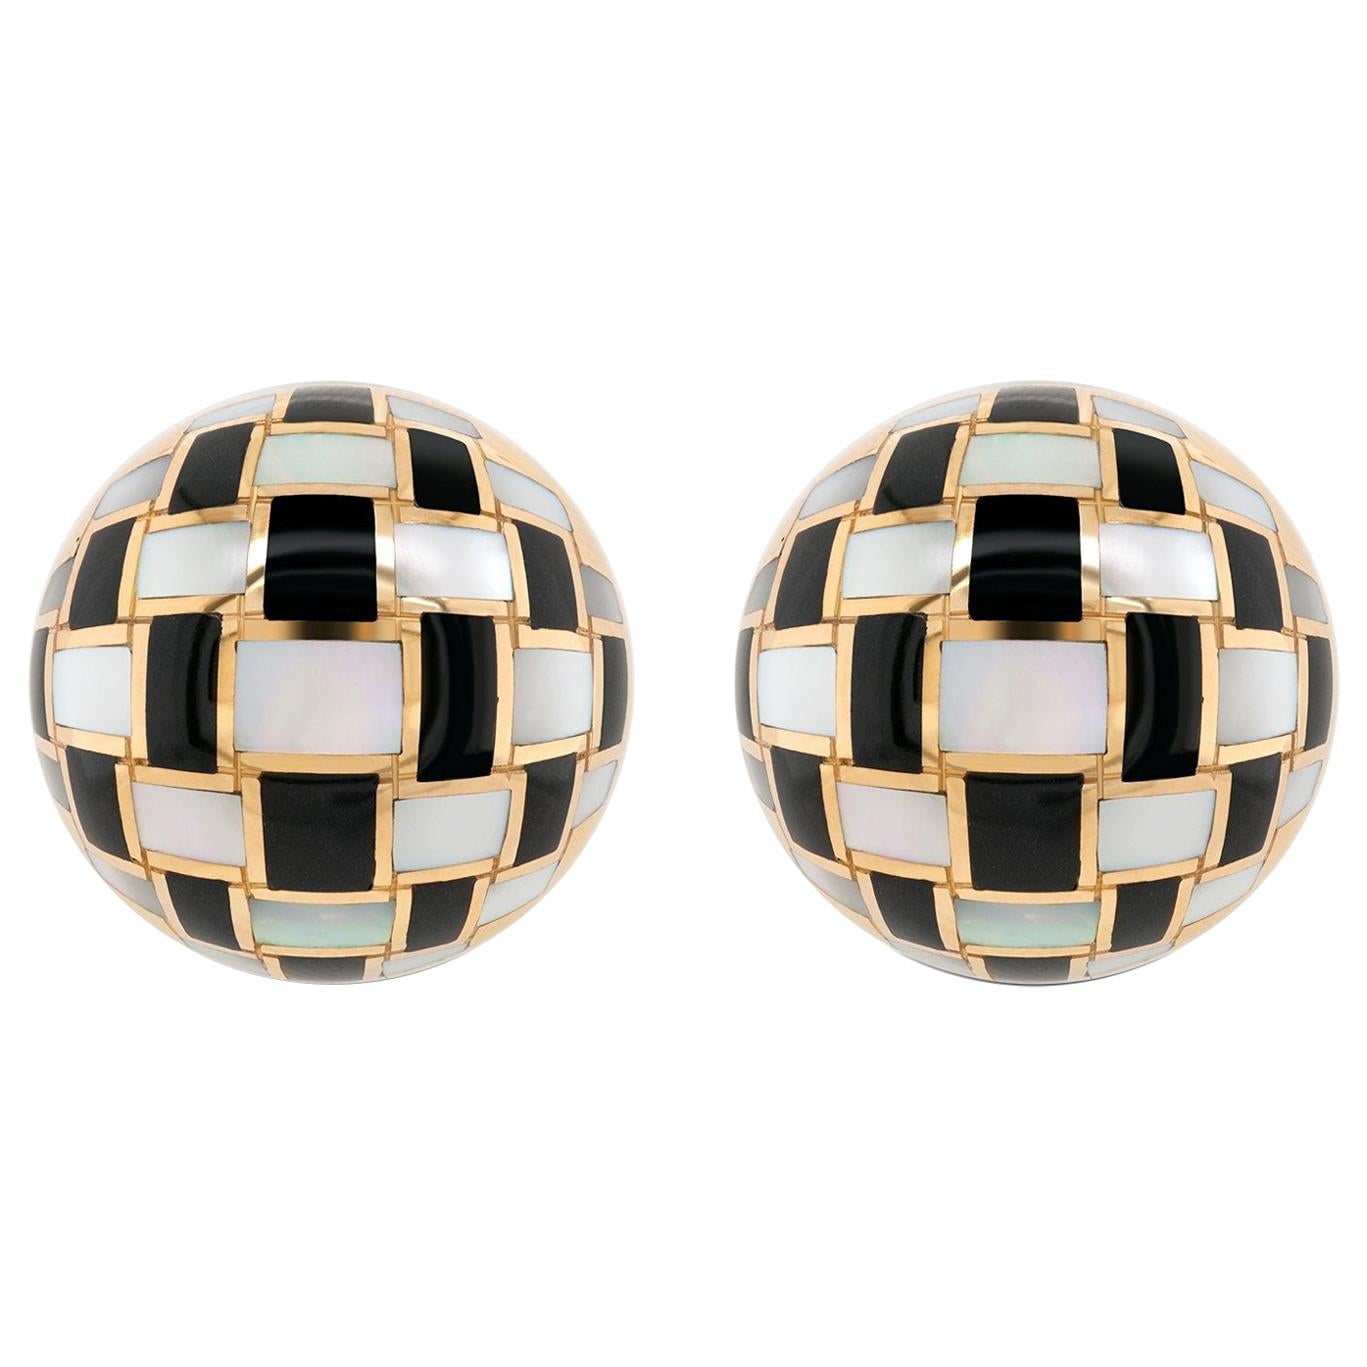 Tiffany & Co. Onyx and Mother of Pearl Checkerboard Earrings in 18 Karat Gold For Sale